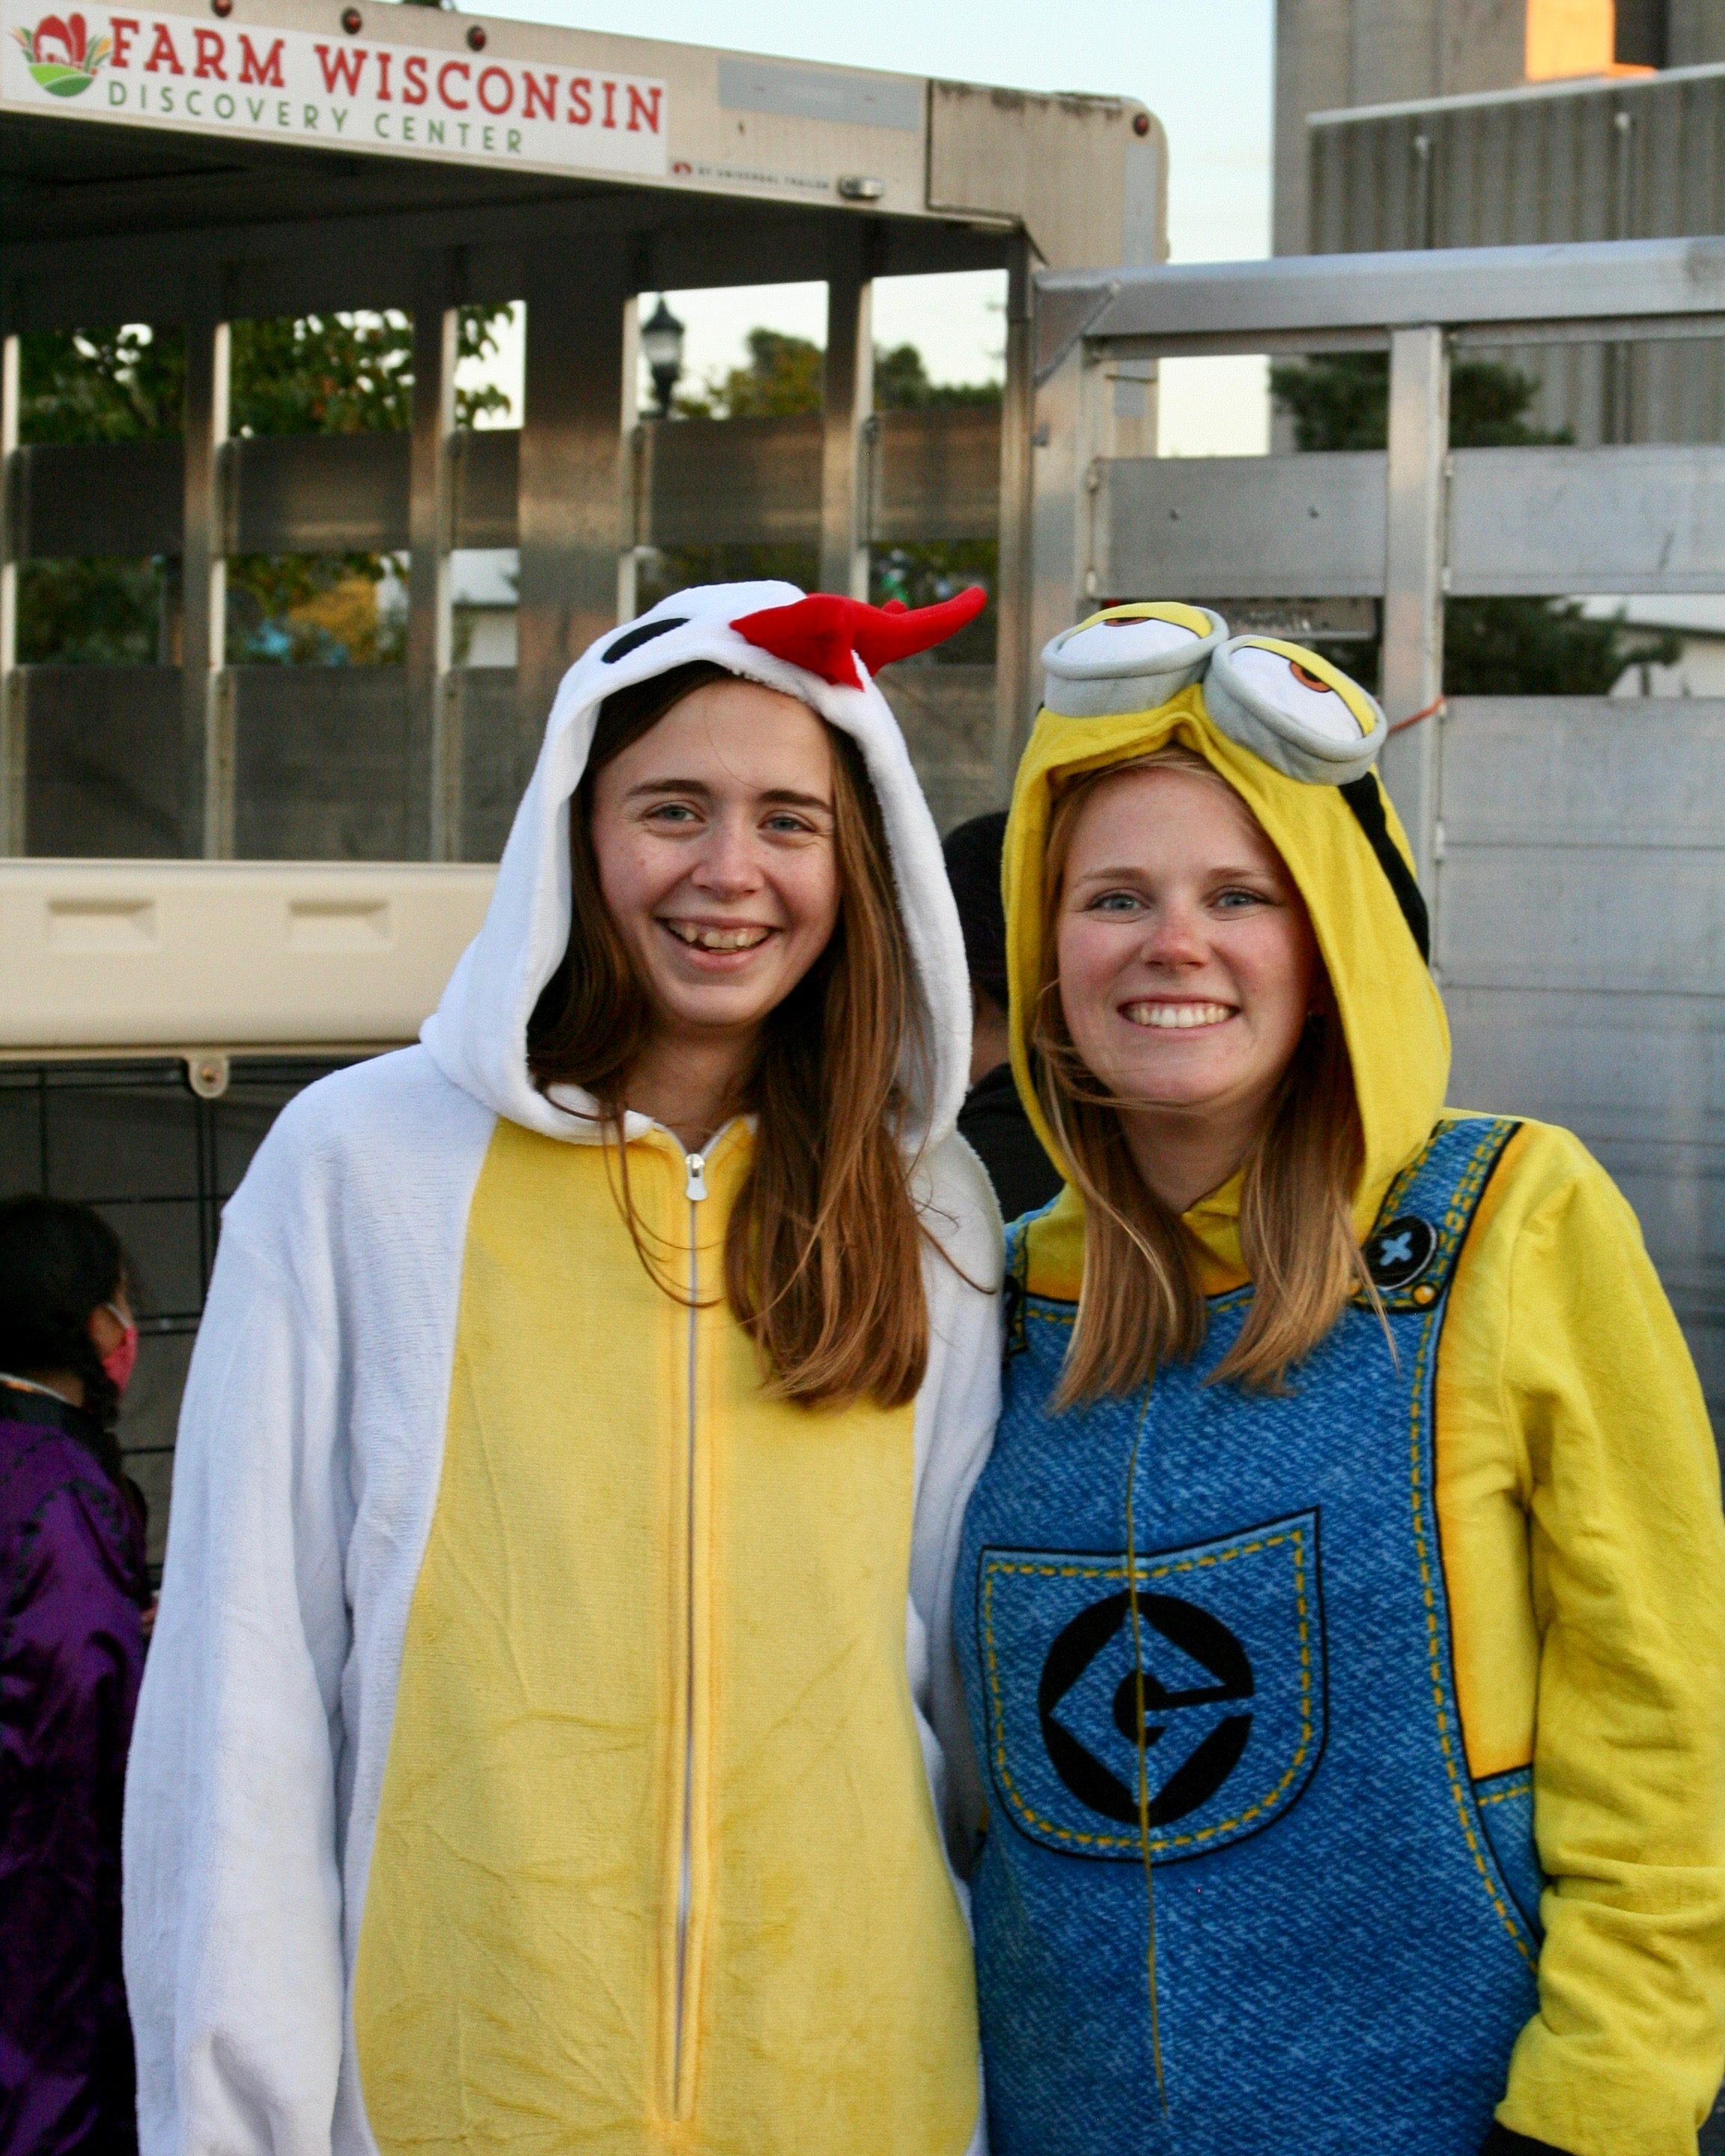 People dressed as a chicken and a minion